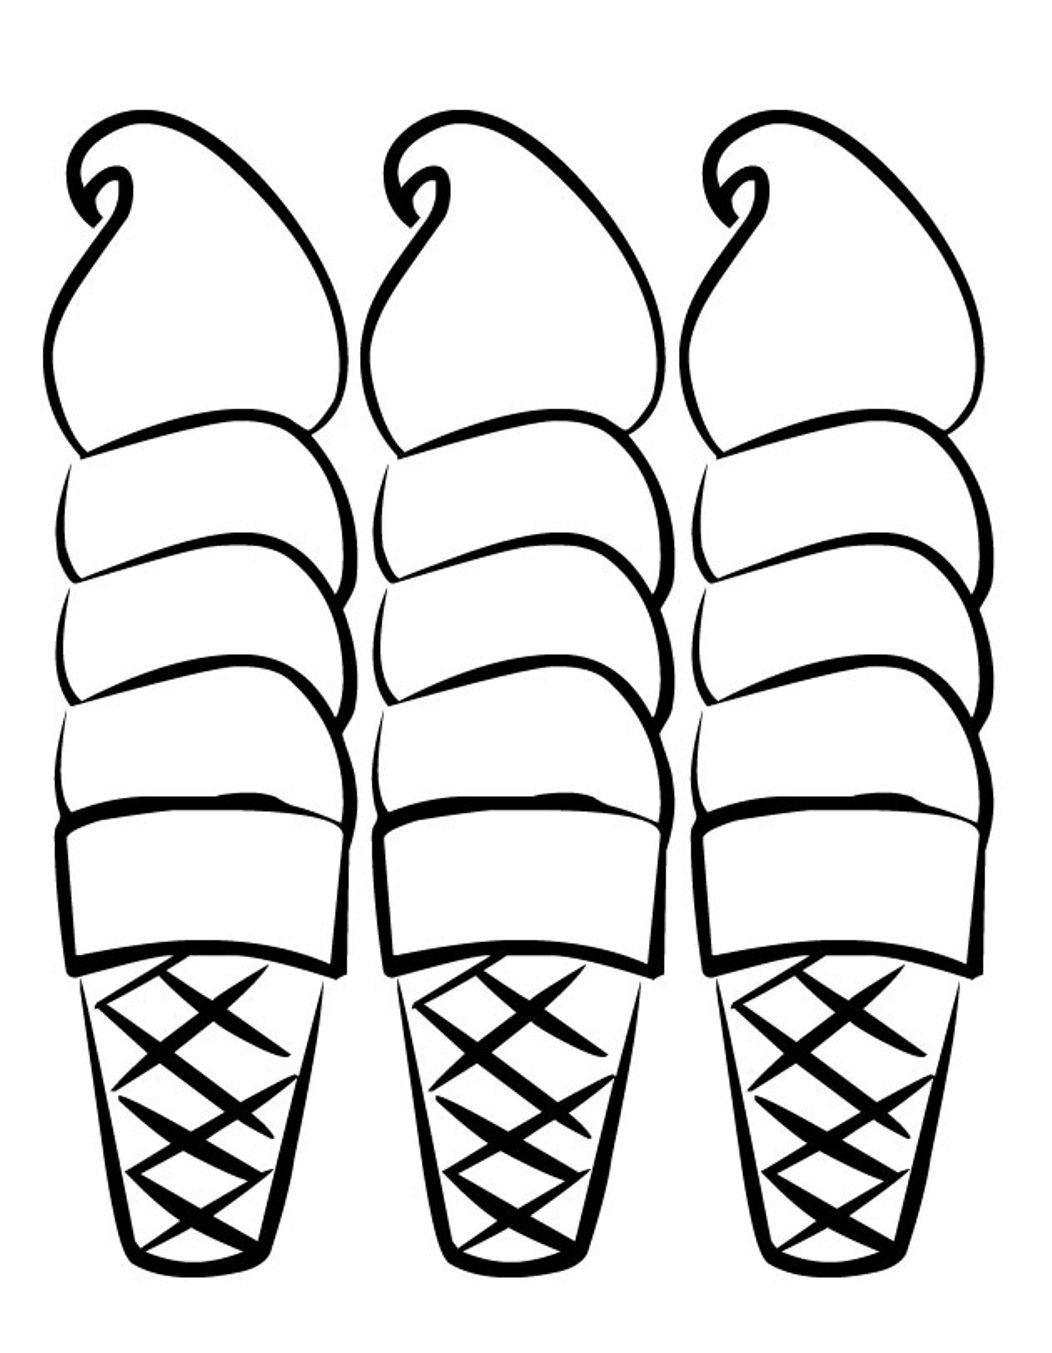 coloring book ~ Ice Cream Coloring Pages Sheets Book Photo Inspirations  Free 77 Ice Cream Coloring Sheets Photo Inspirations. Cute Ice Cream  Coloring Sheets For Kids. Ice Cream Coloring Sheets. Free Ice